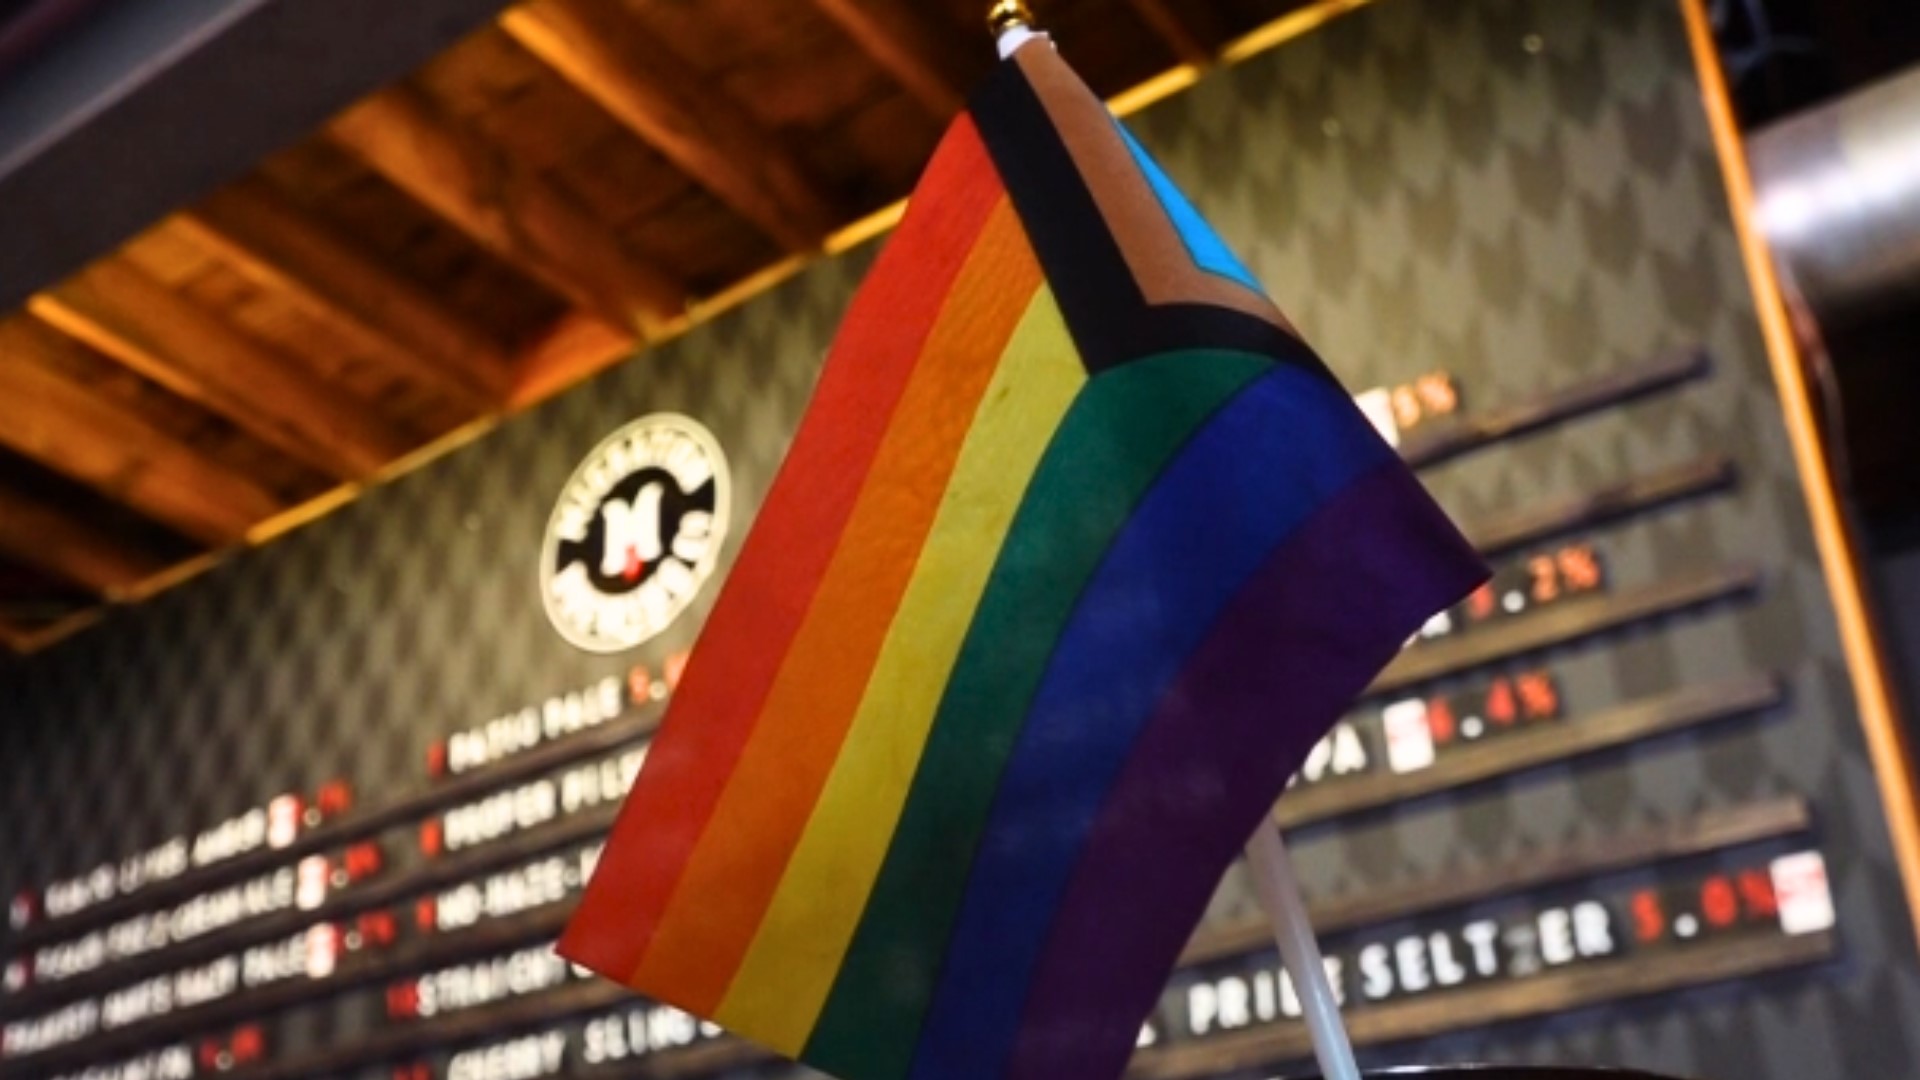 The event is a collaboration between Portland Celebrates Pride and eight breweries in the area. It runs through Sunday, July 16.